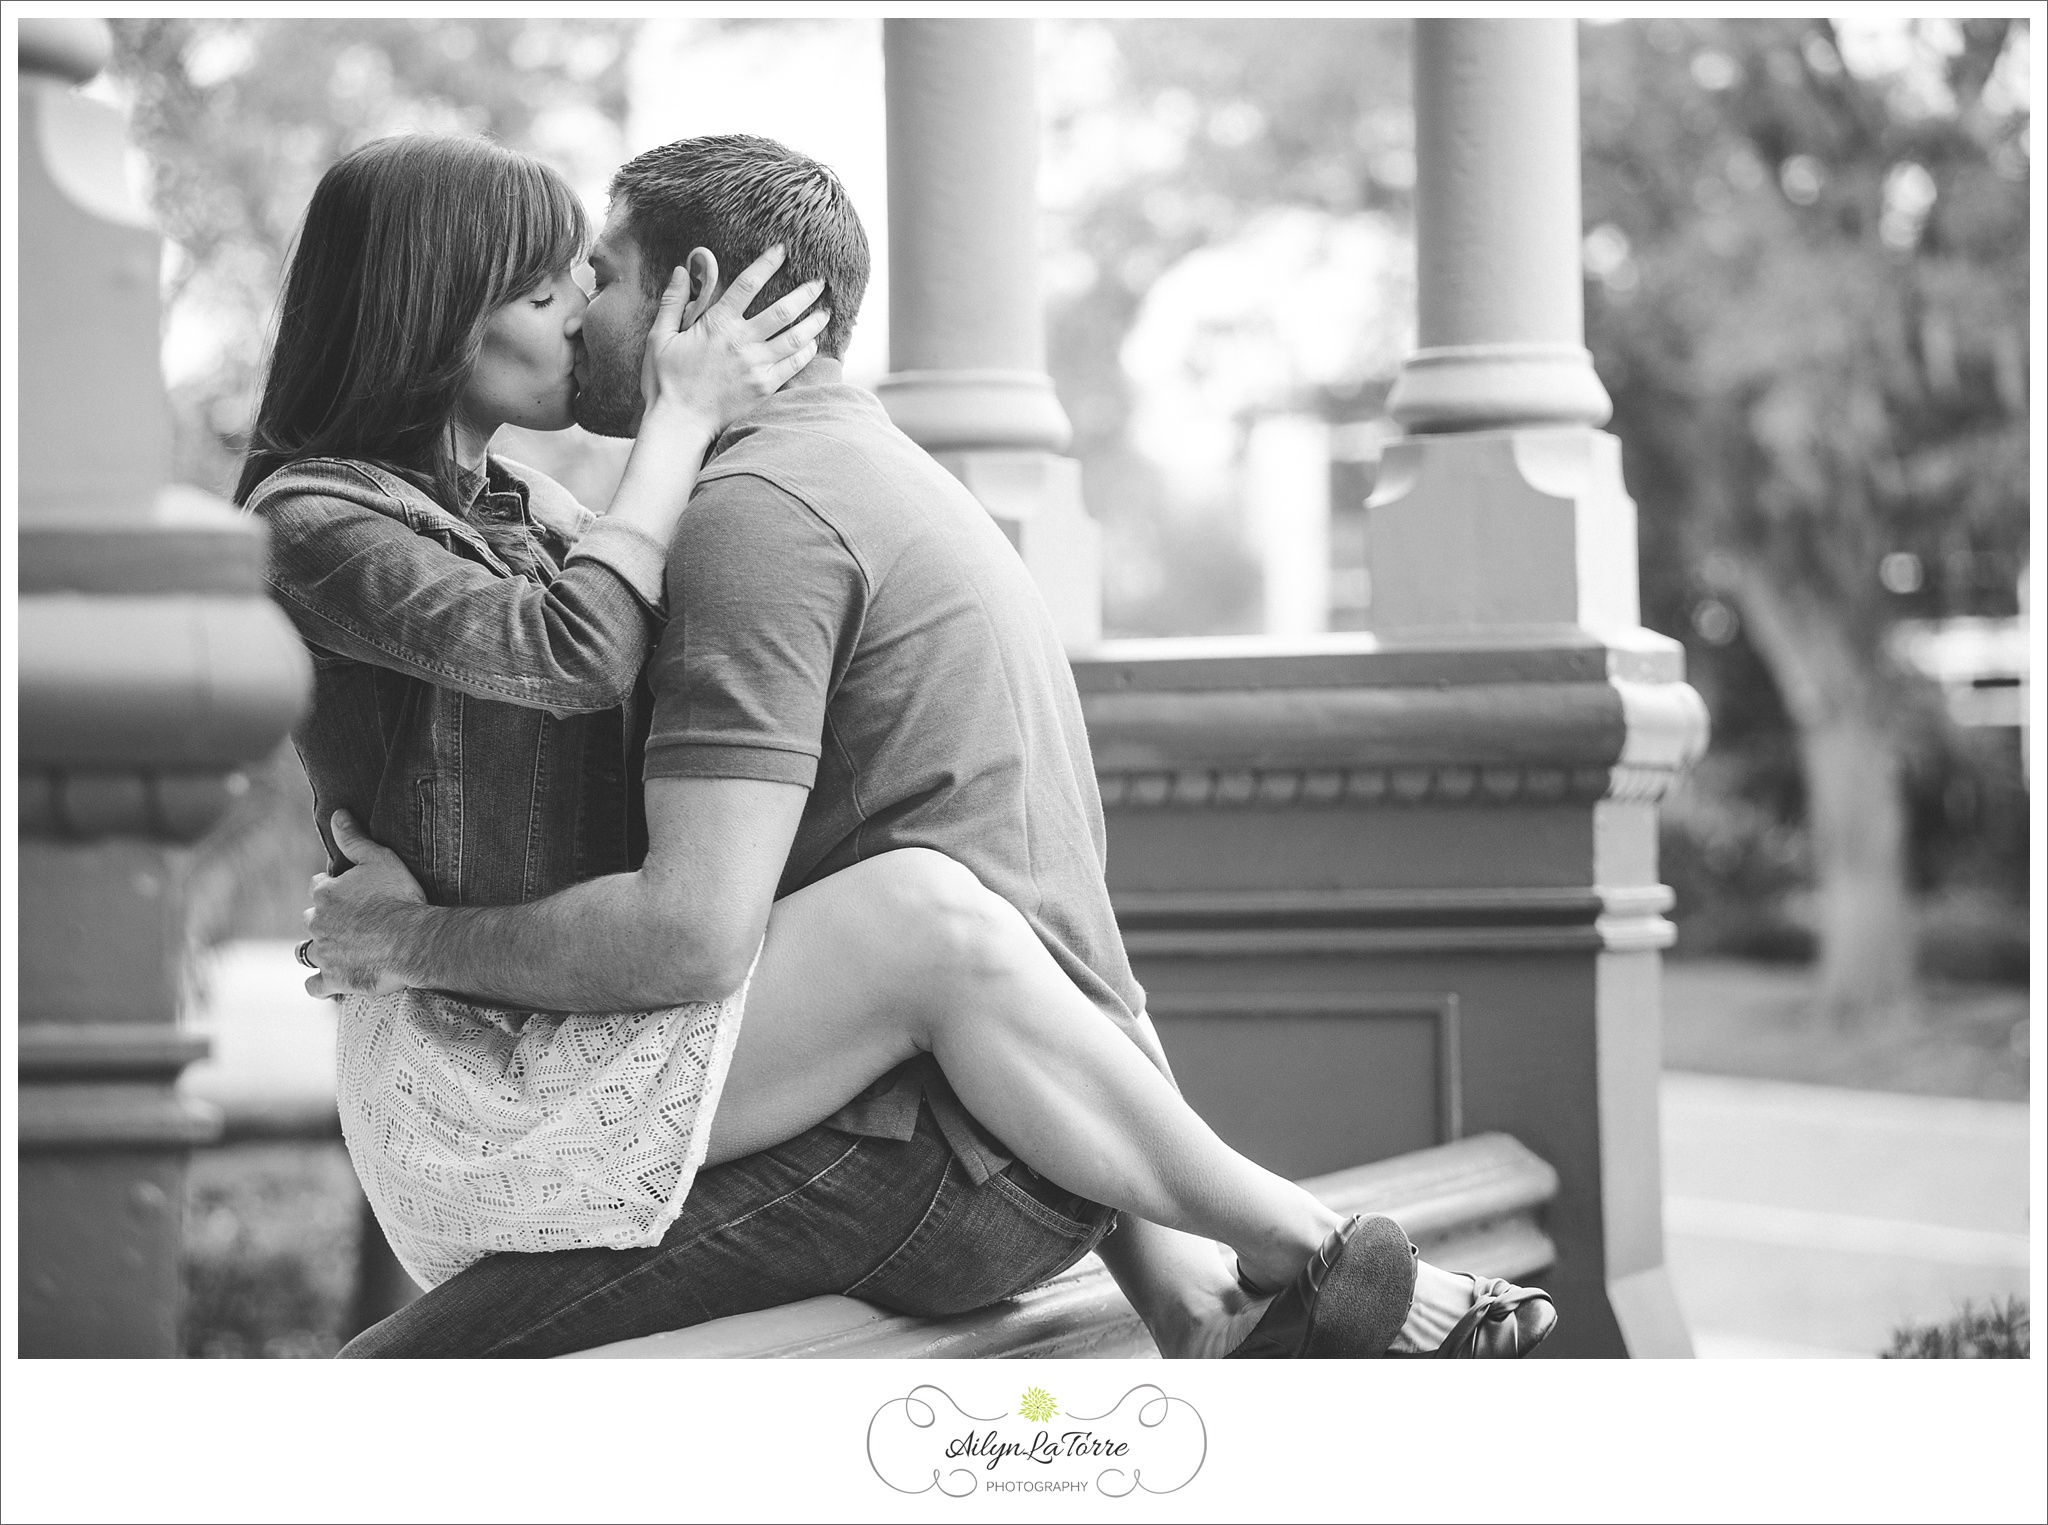 Tampa Photographer | © Ailyn La Torre Photography 2014